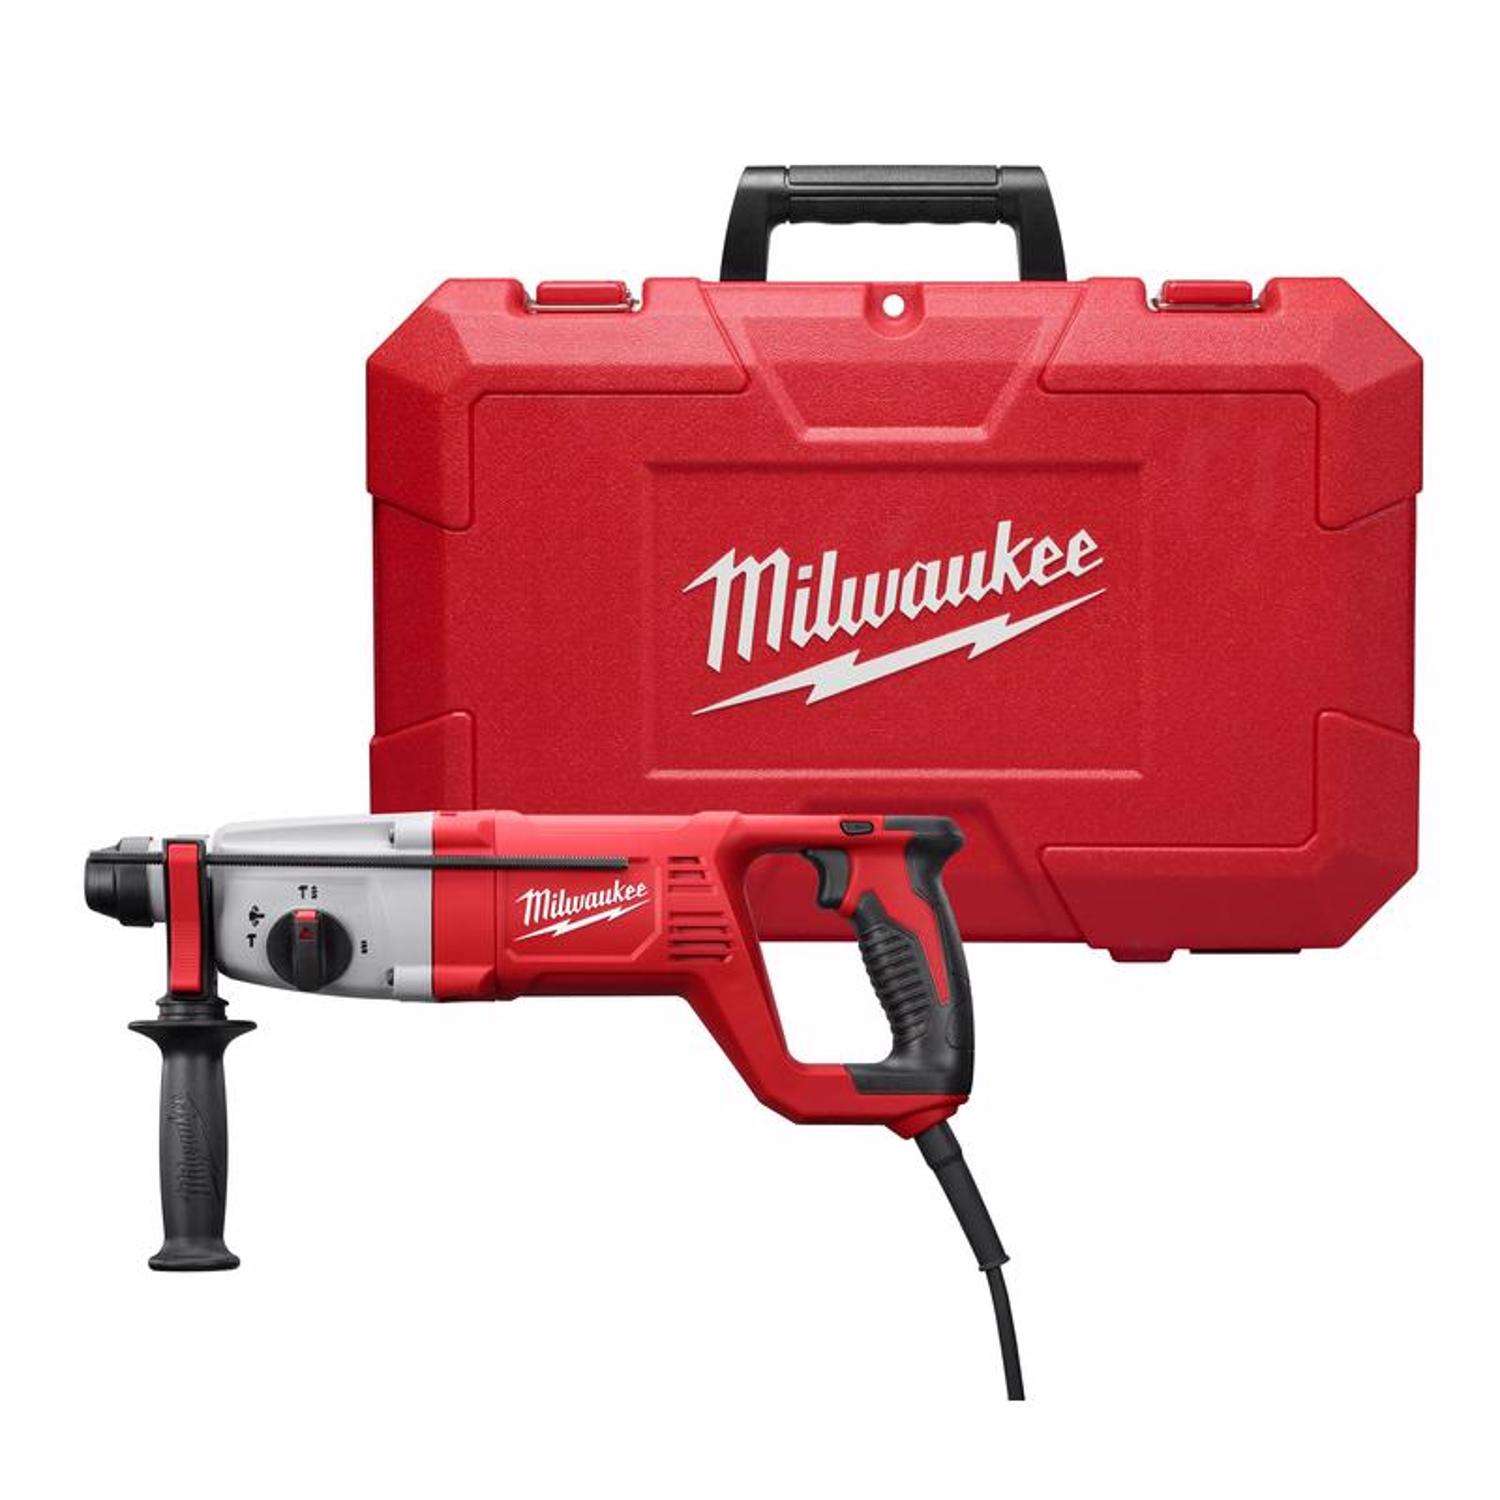 Milwaukee 8 amps 1 in. Corded SDS-Plus Rotary Hammer Drill - Ace Hardware